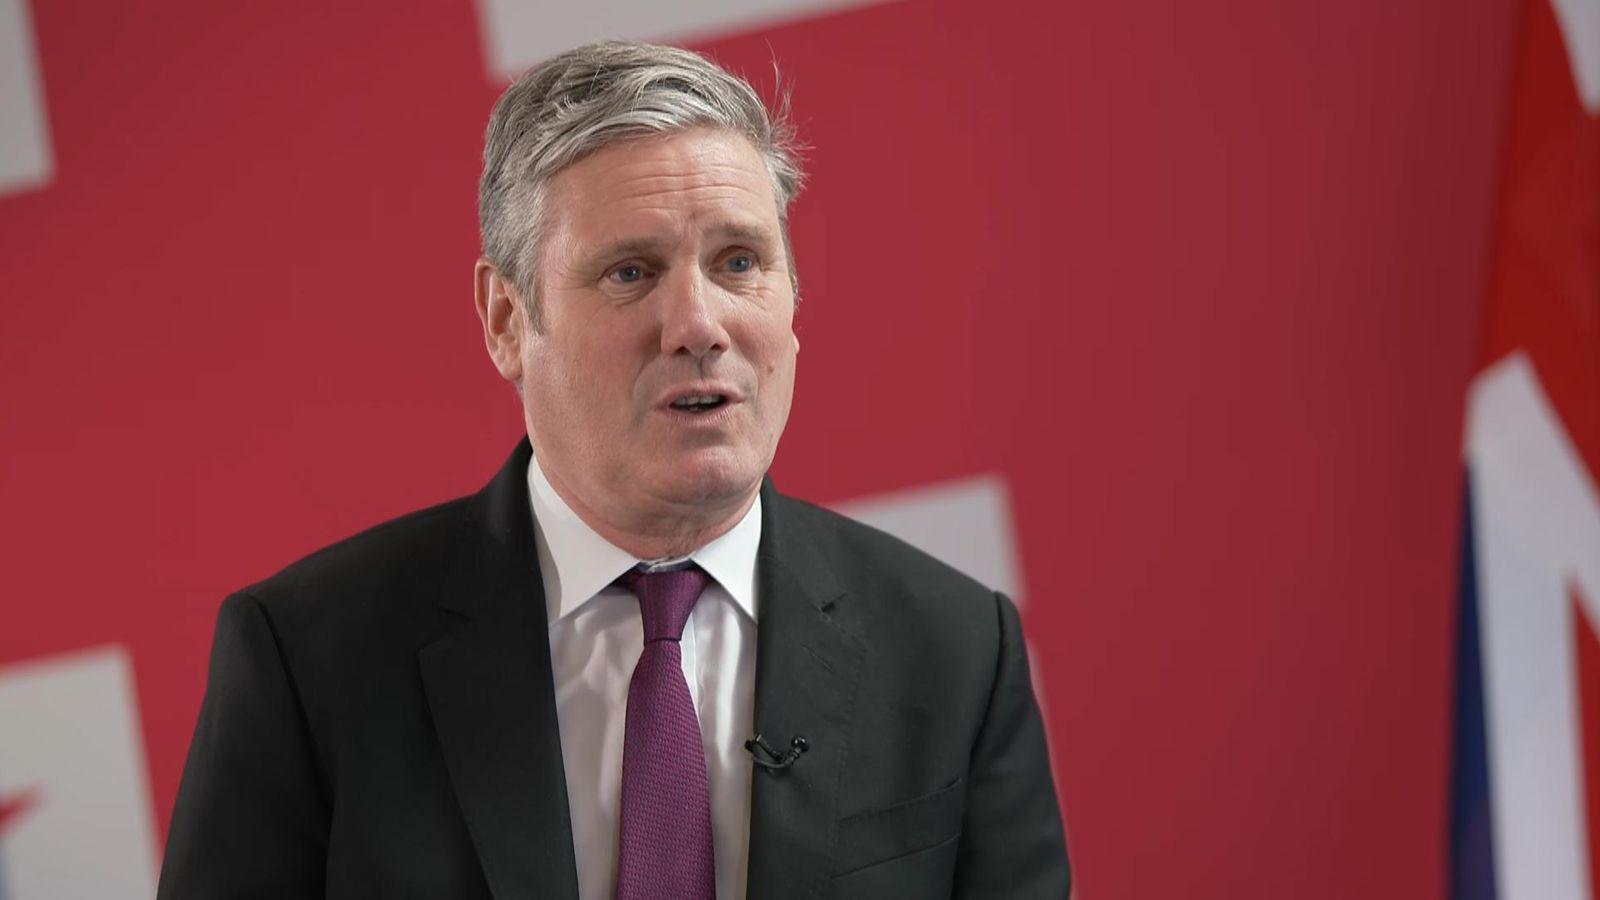 Sir Keir Starmer refuses seven times to rule out deal with Liberal Democrats as projections show hung parliament